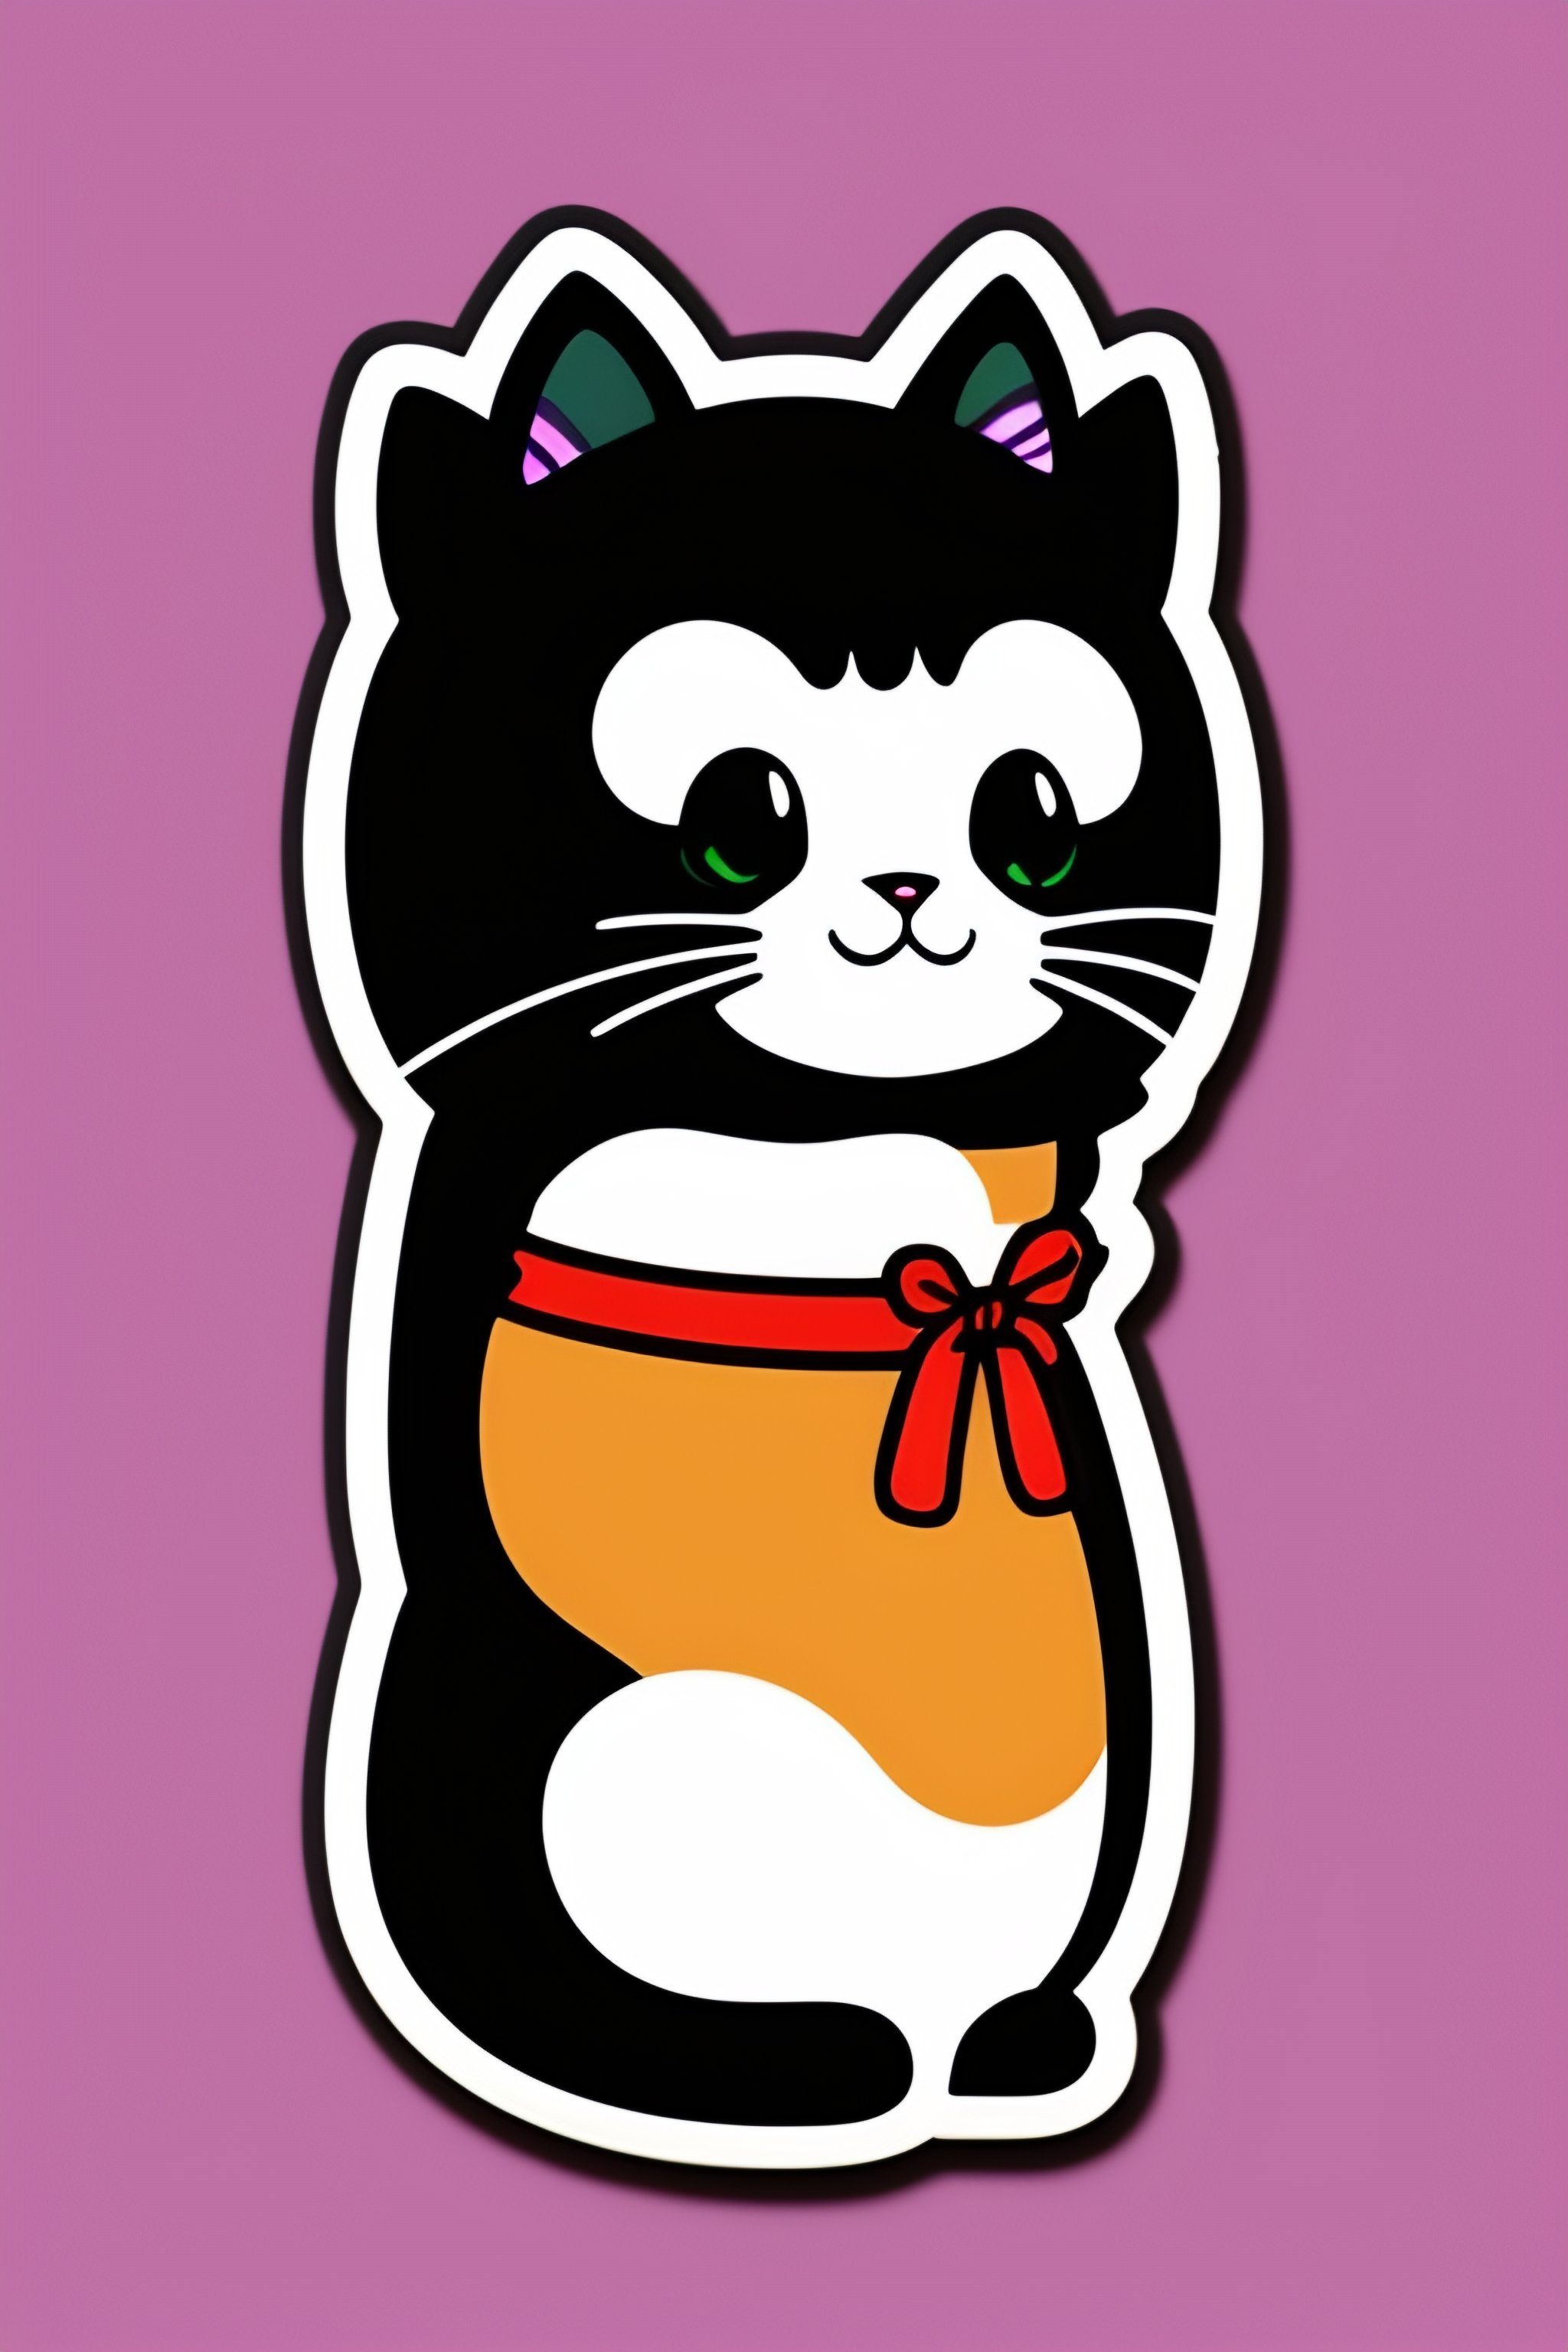 Lexica - Cute cartoon kitty sticker, anime style, solid background color